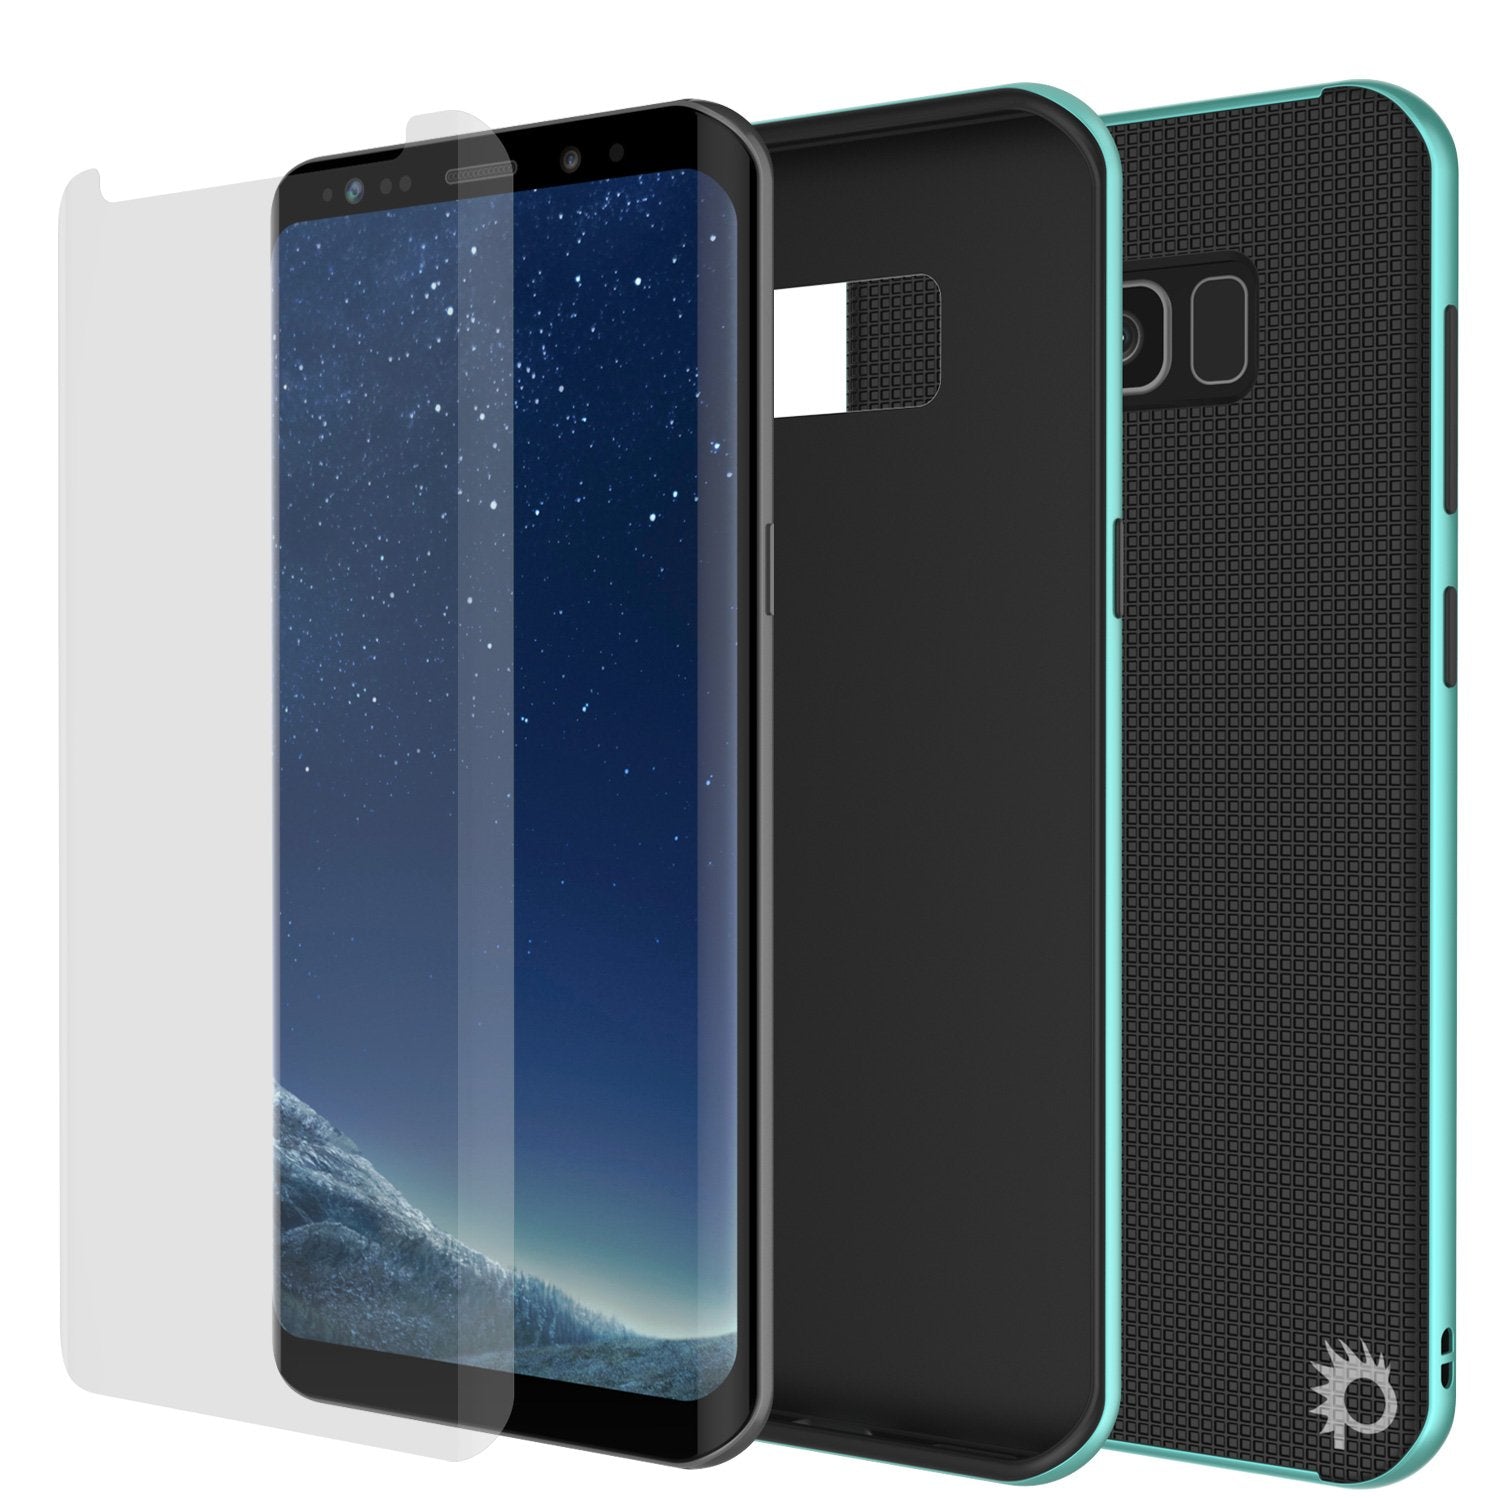 Galaxy S8 PLUS Case, PunkCase Stealth Teal Series Hybrid 3-Piece Shockproof Dual Layer Cover